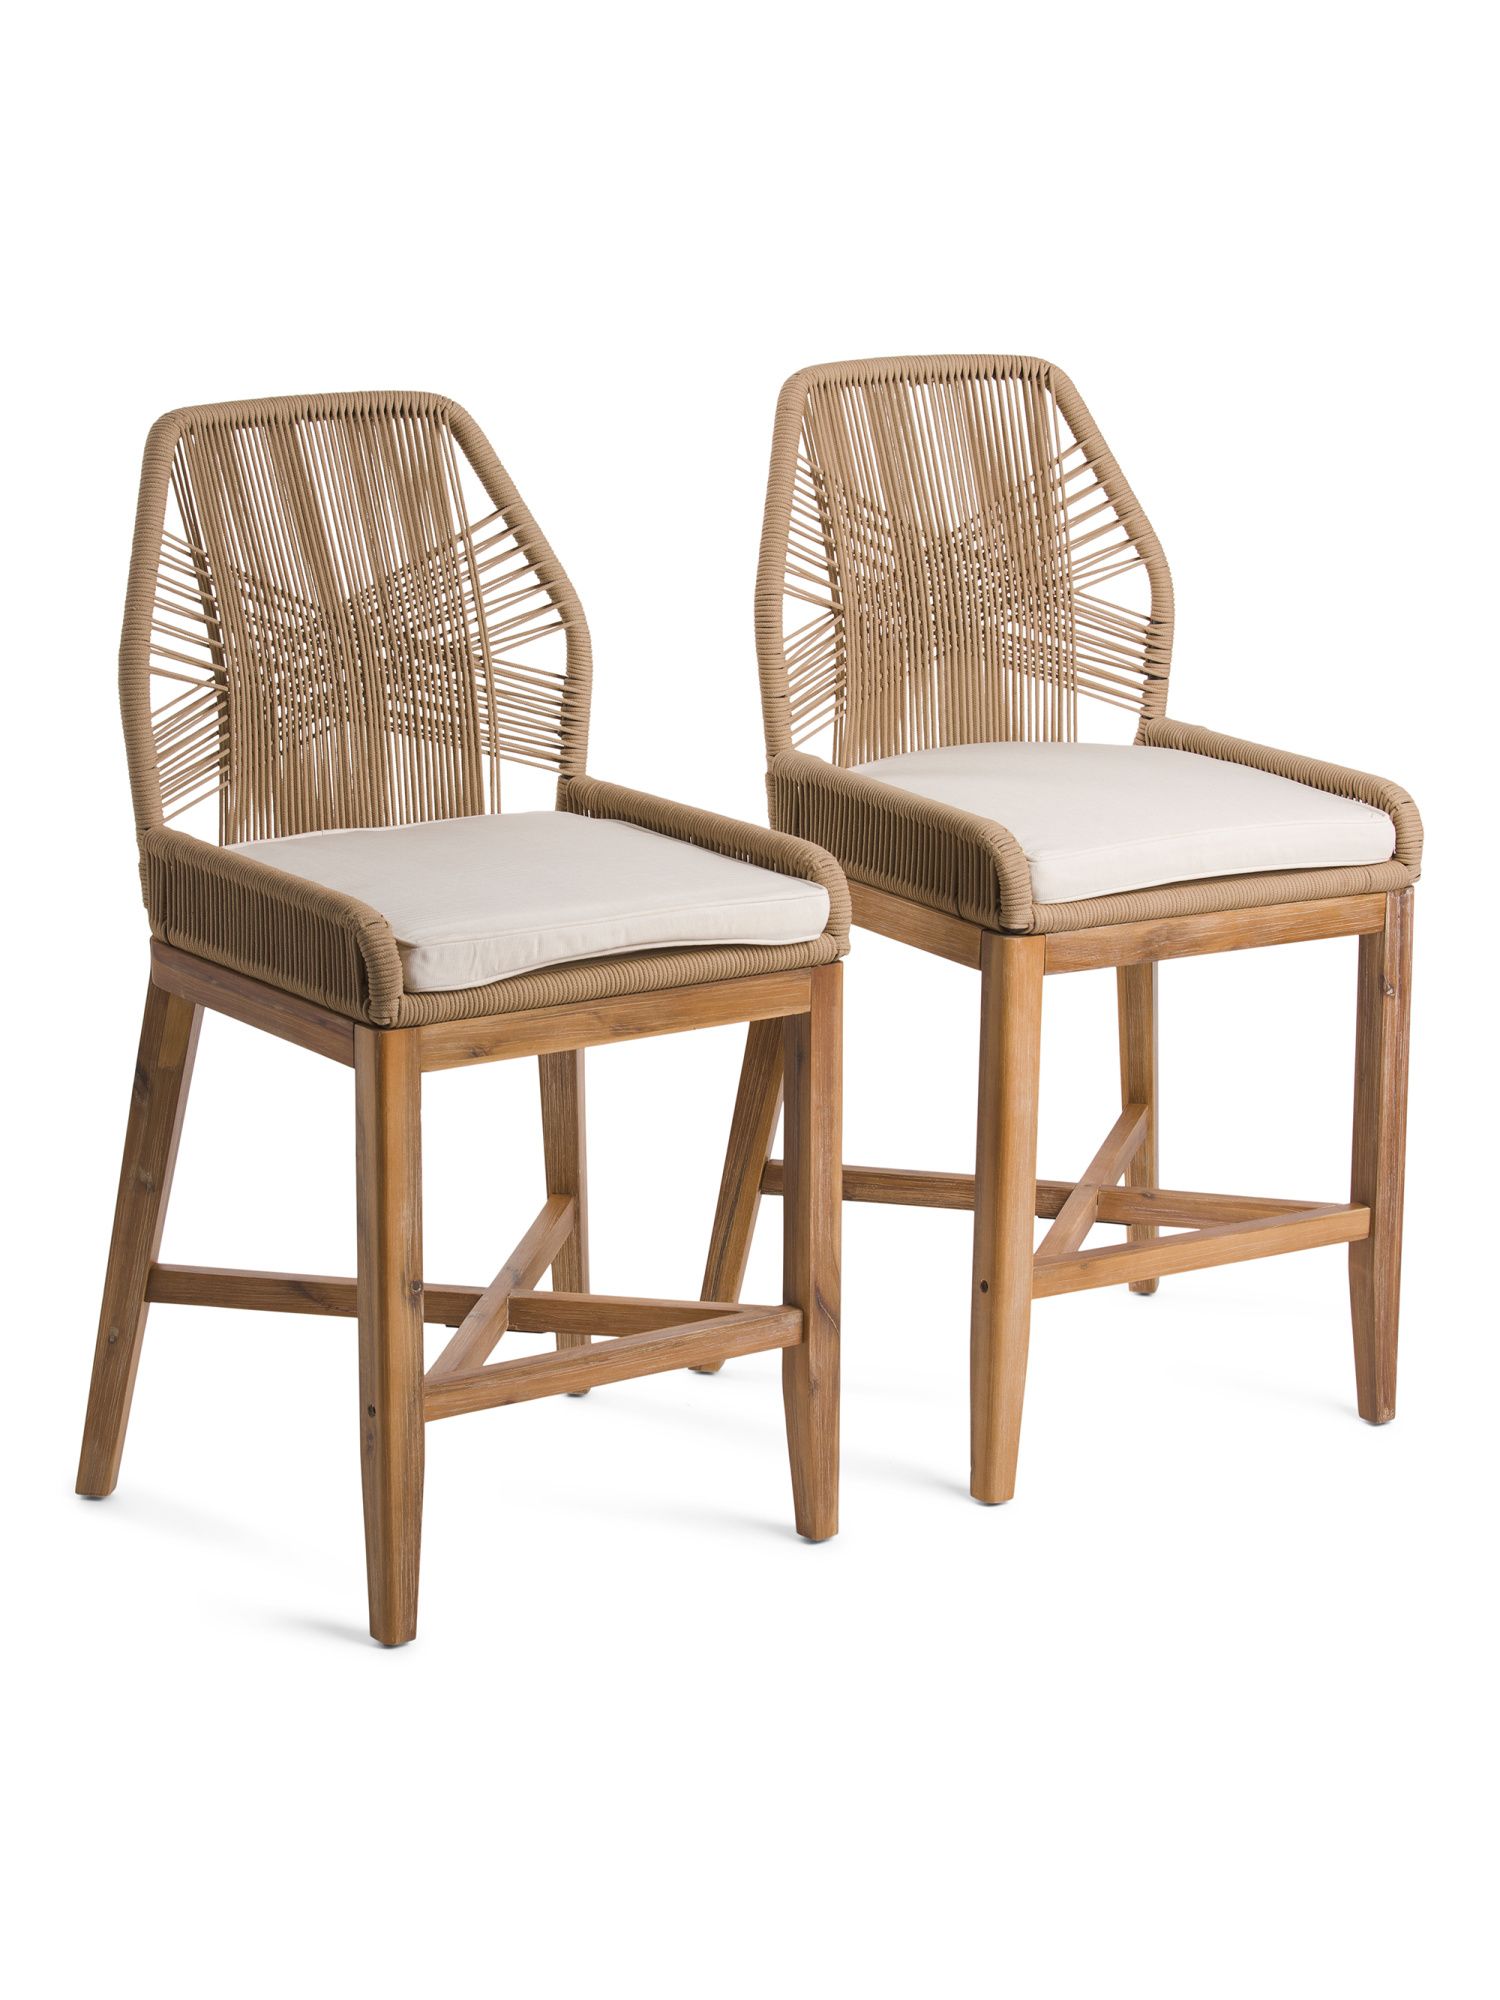 Set Of 2 Rope Crossweave Counter Stools With Cushion Seats | TJ Maxx